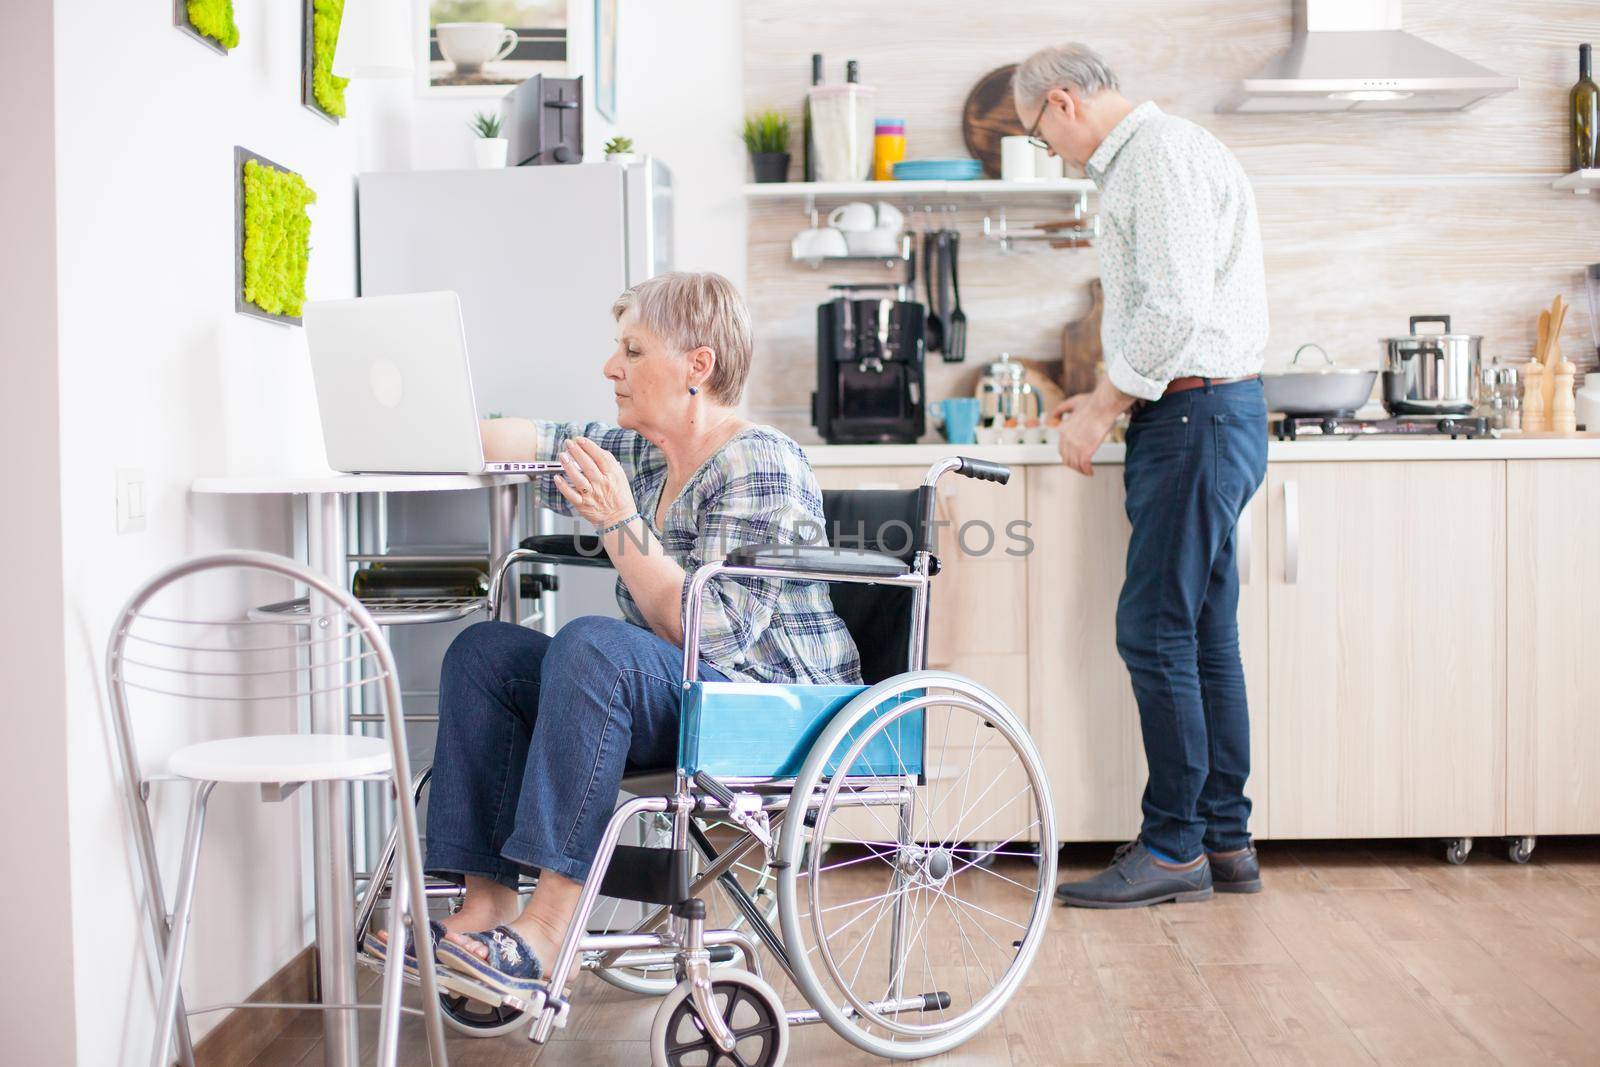 Disabled old woman in wheelchair working on laptop in kitchen. Paralyzed handicapped old elderly person using modern communication online internet web techonolgy.